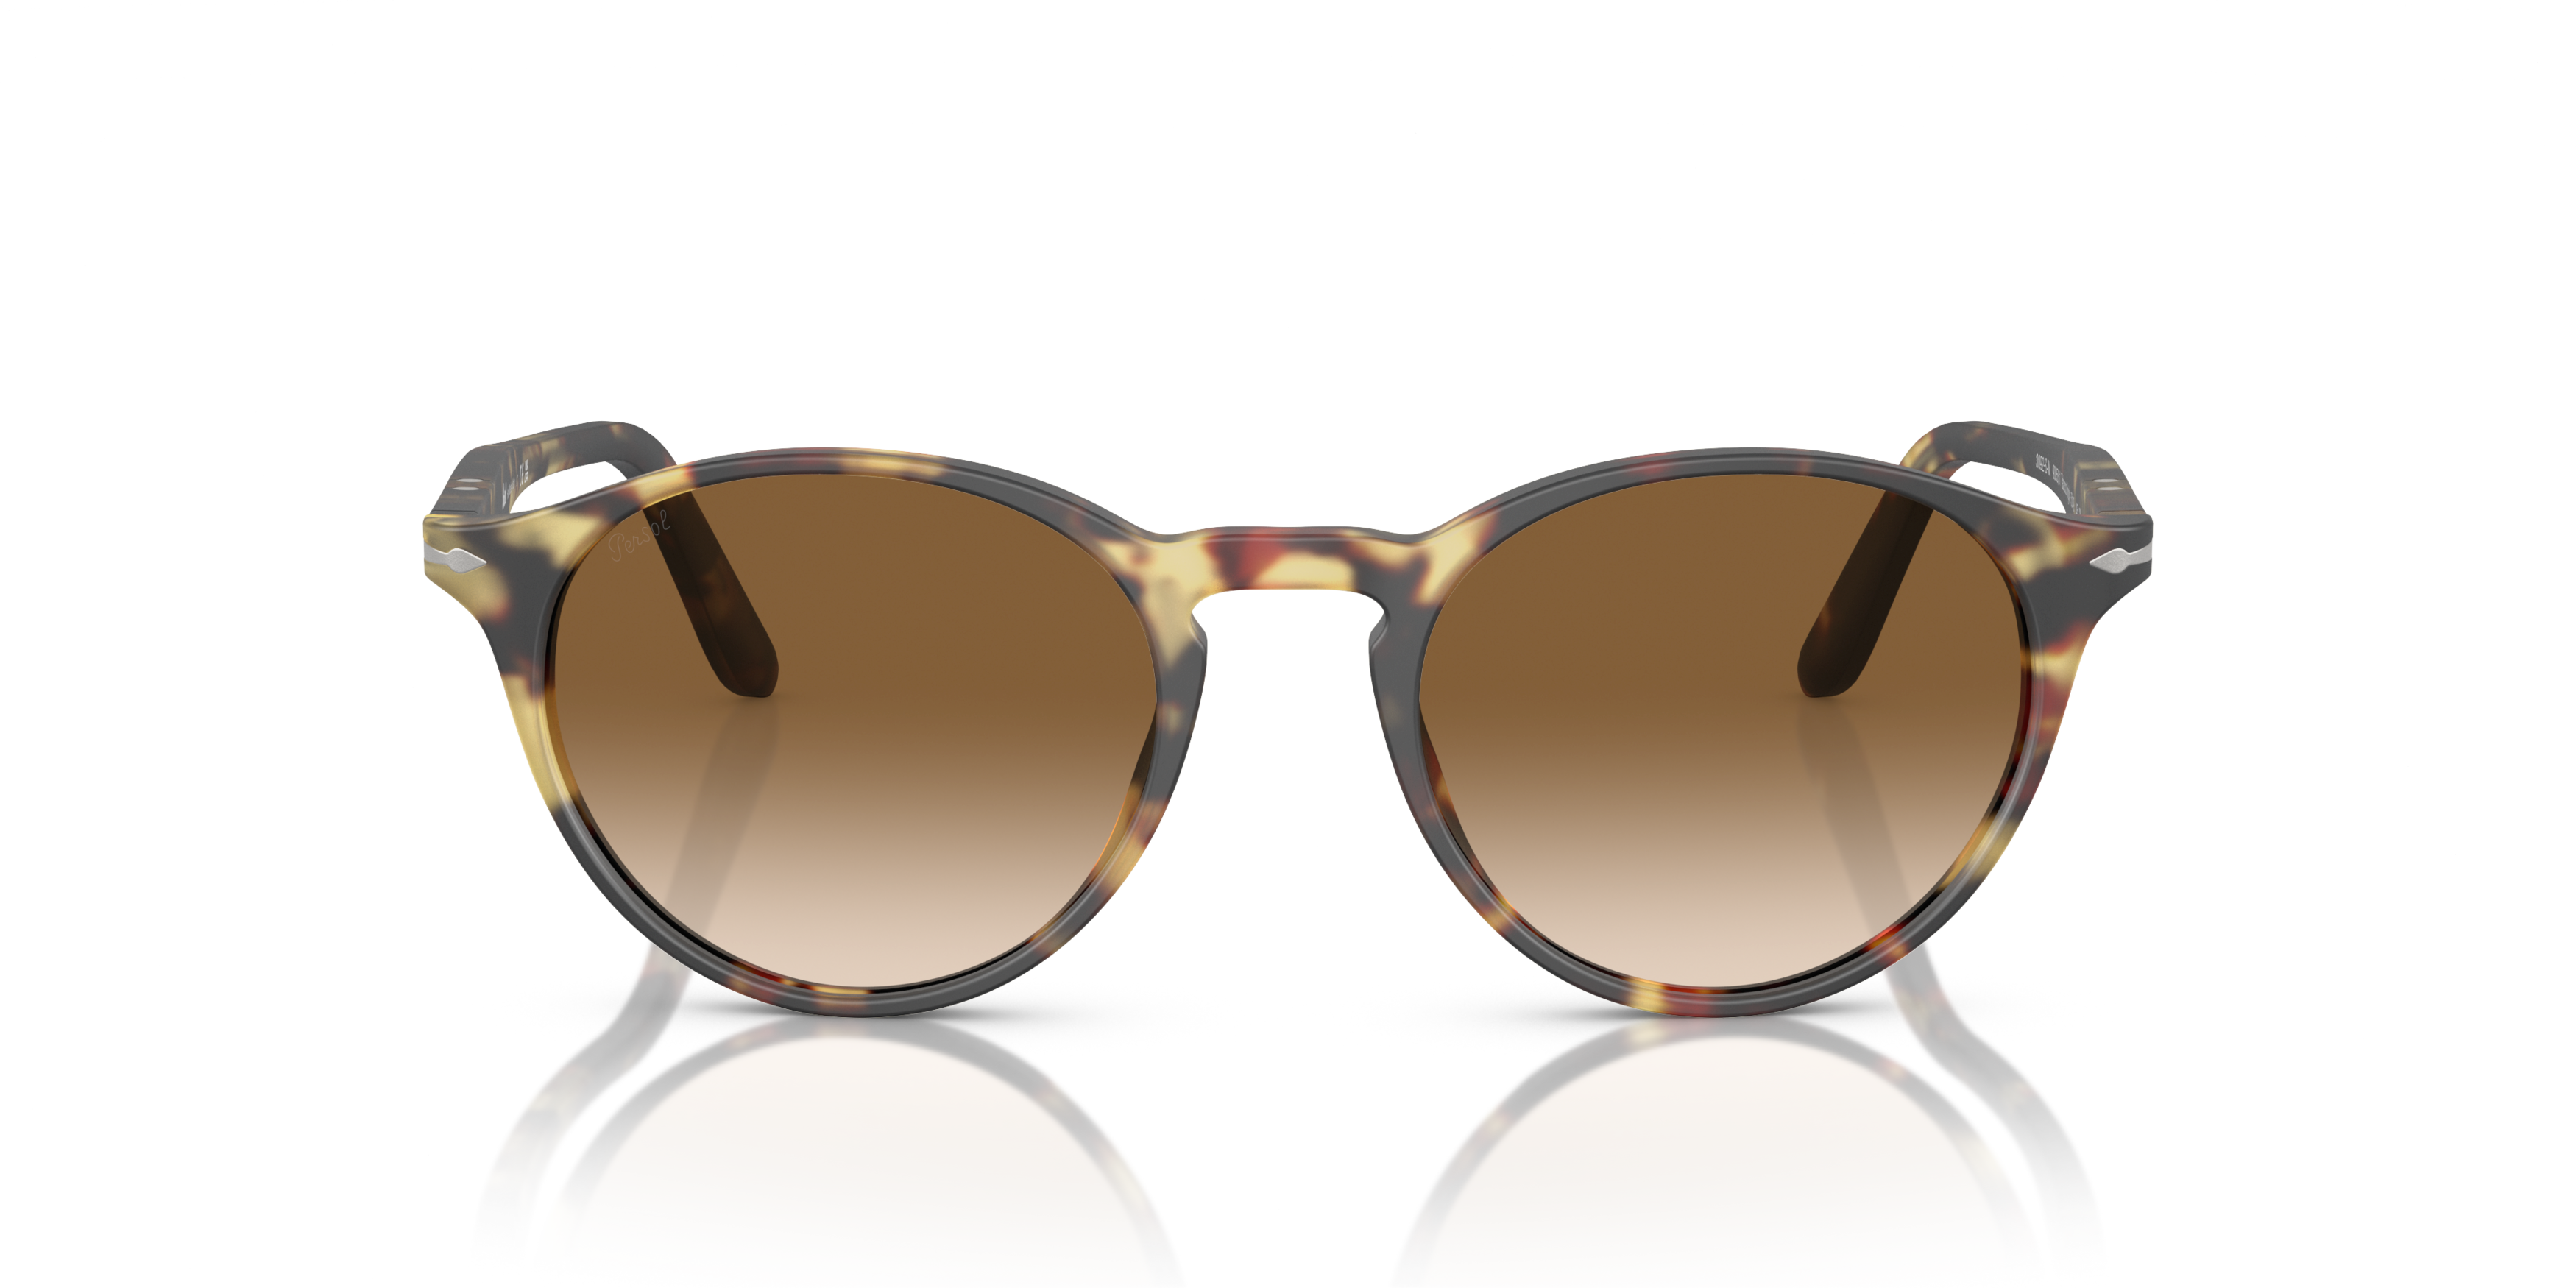 [products.image.front] Persol 0PO3092SM 900551